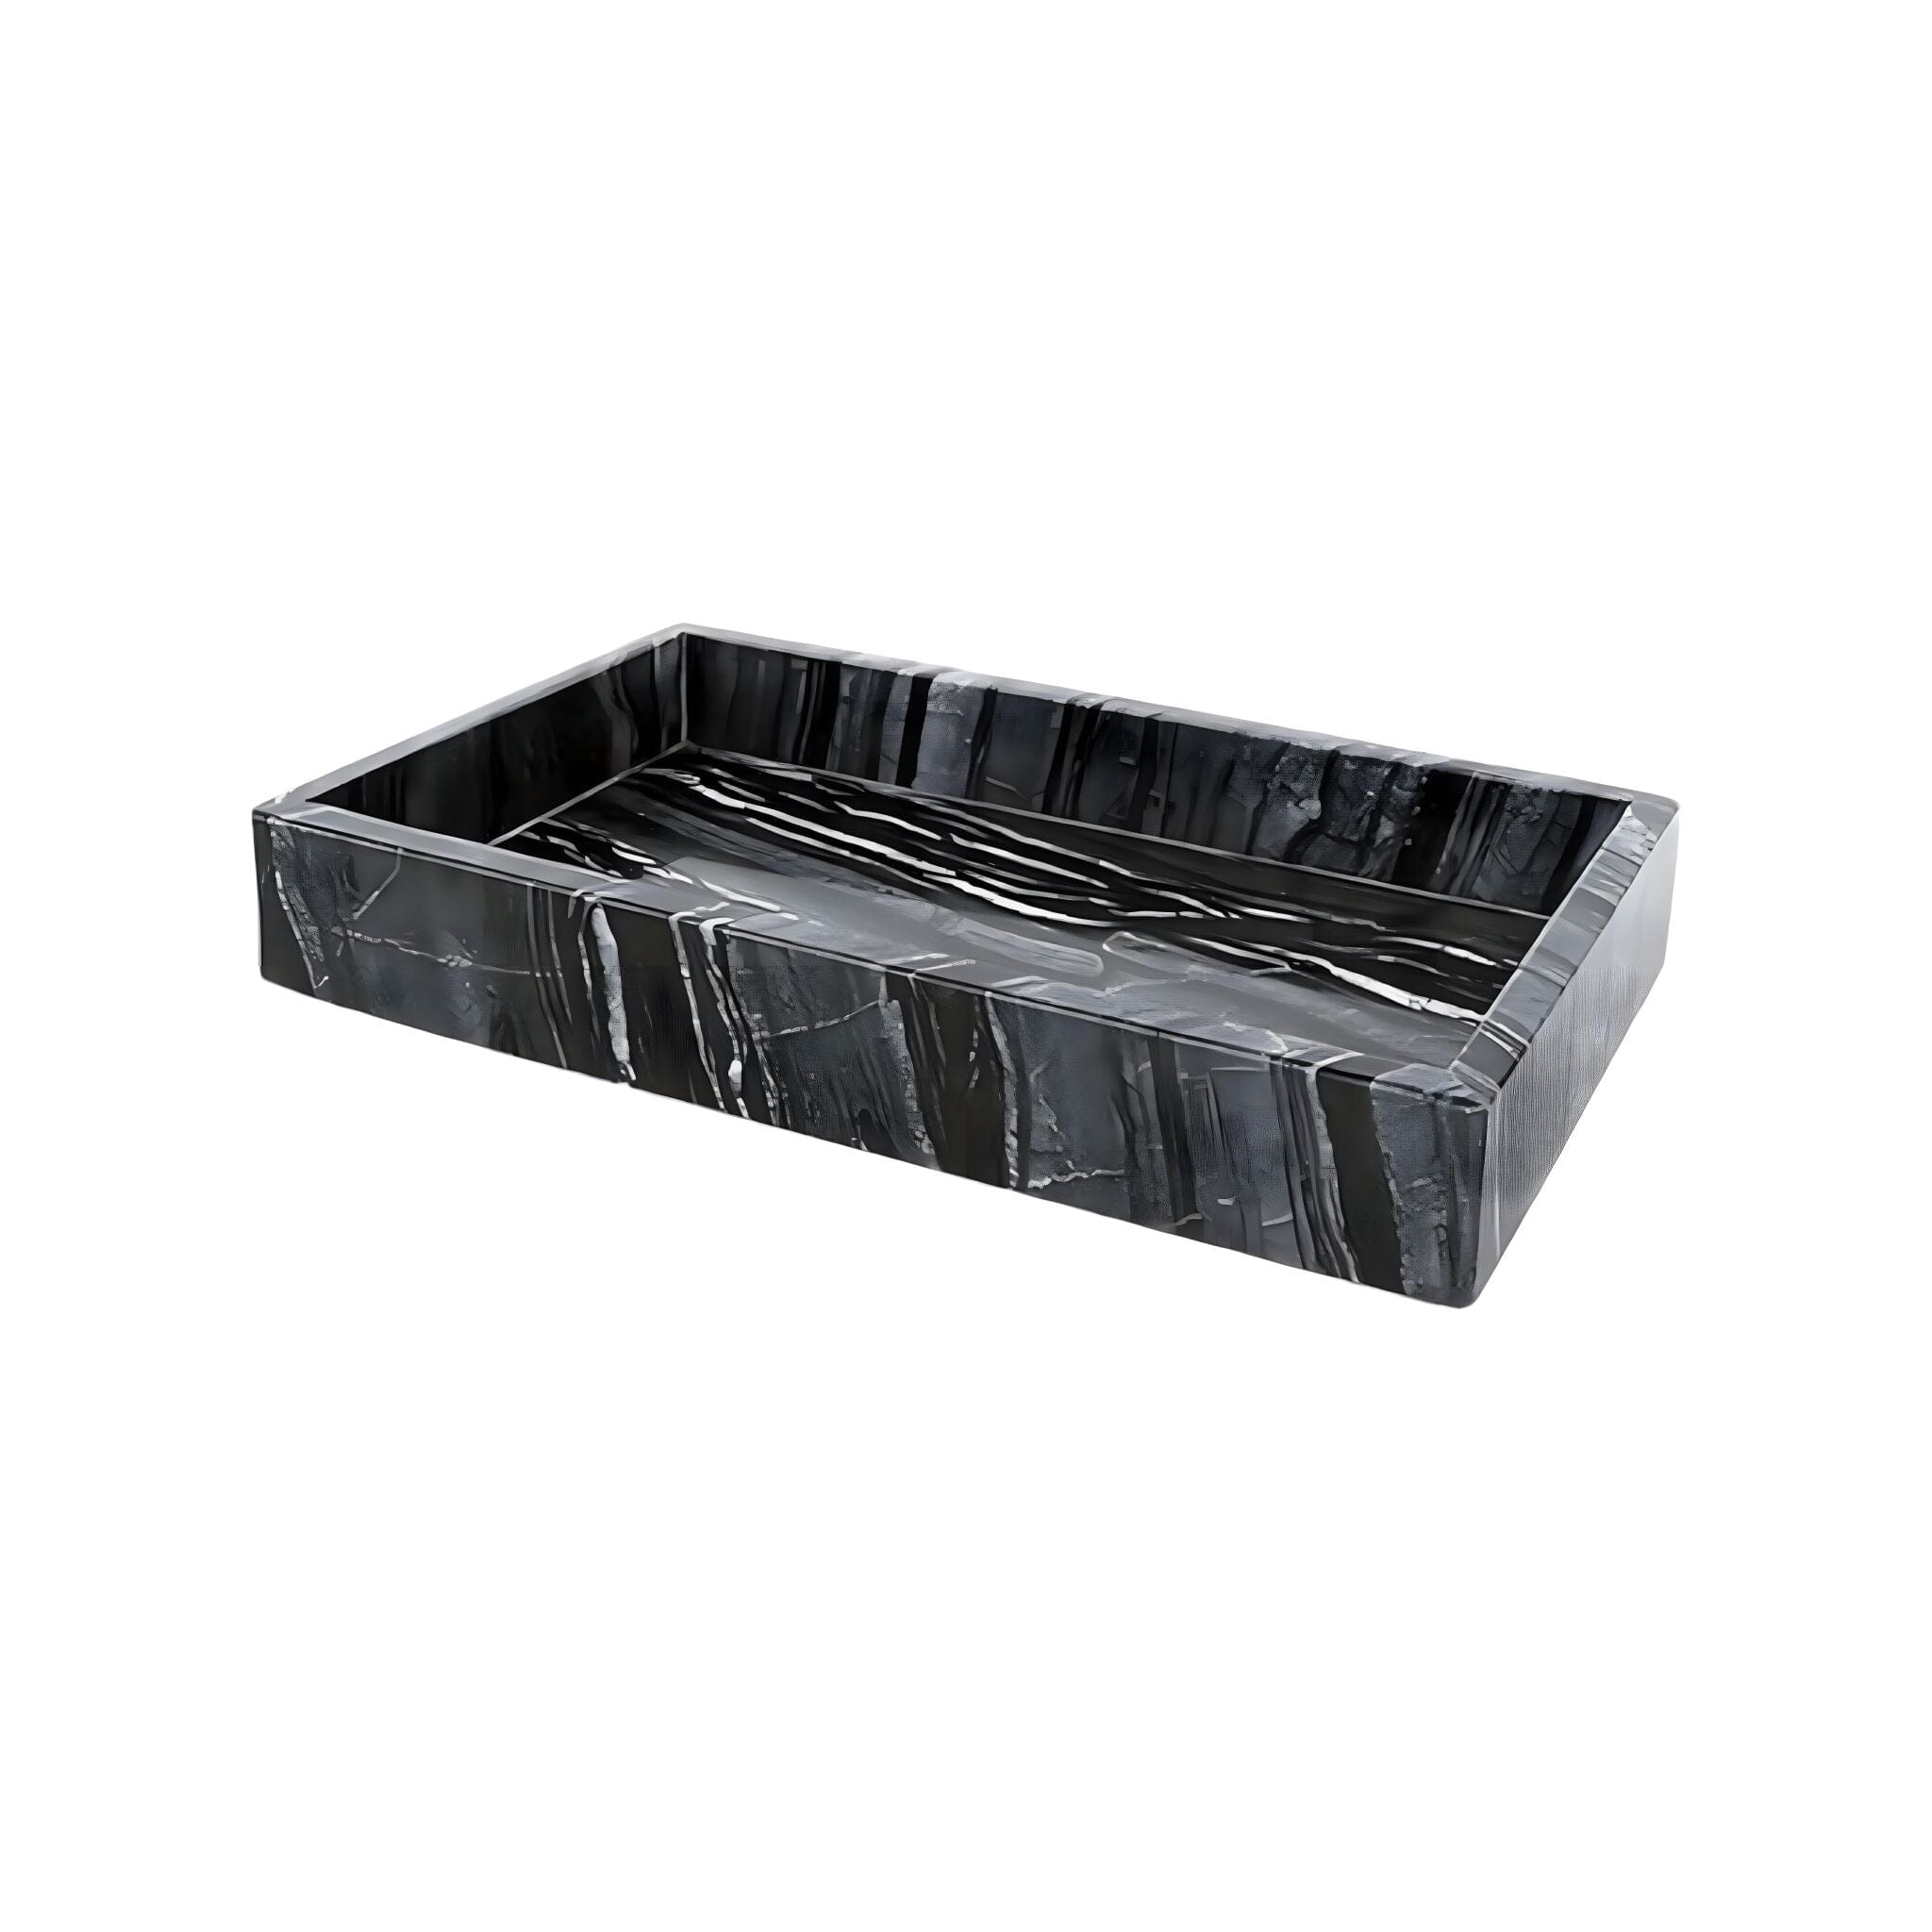 Claude Marble Bathroom Accessories Collection Bathroom Accessories Tray A 